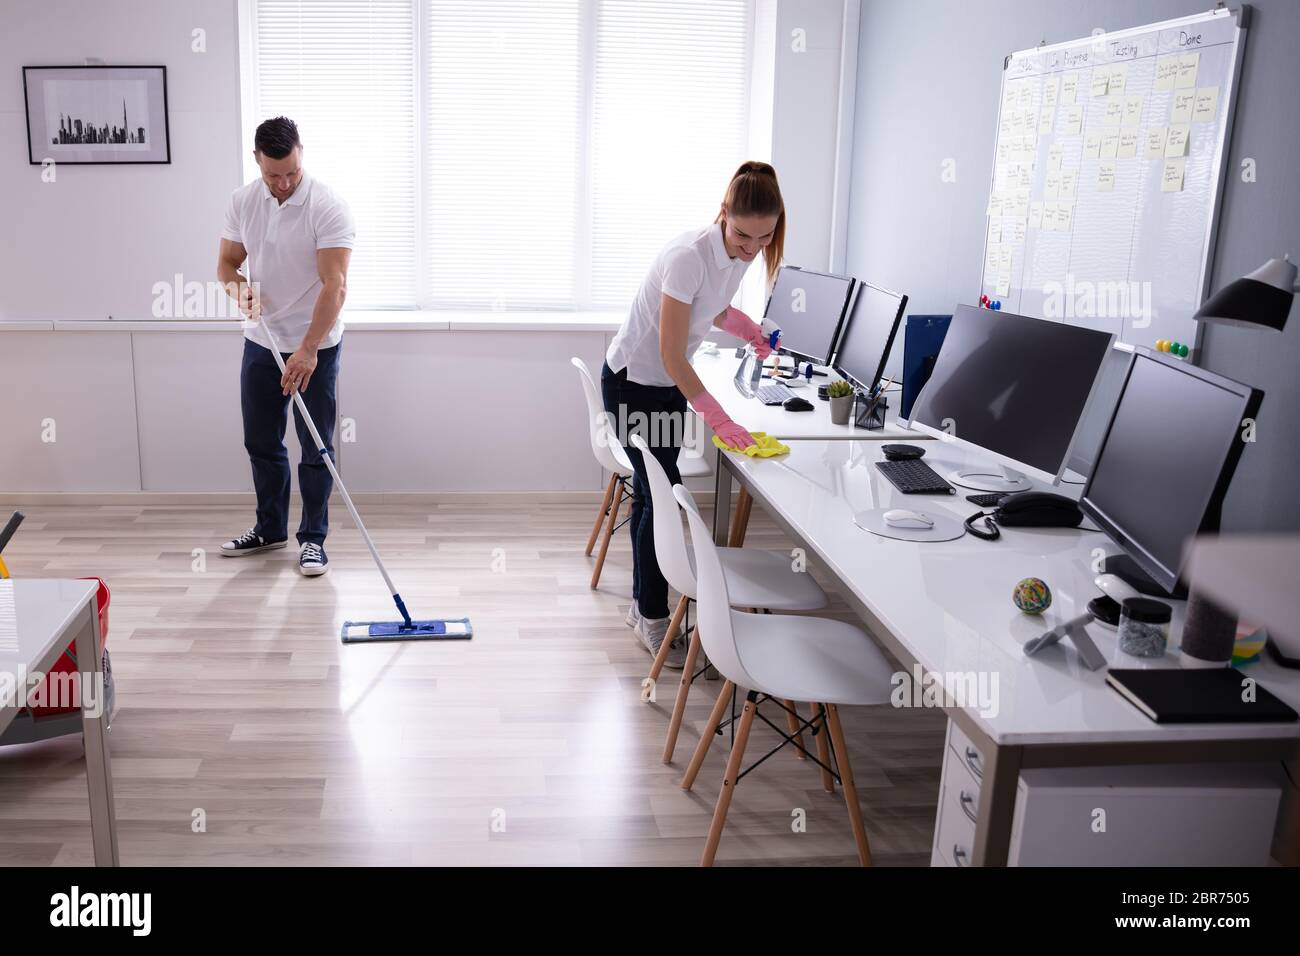 Two Smiling Young Janitor Cleaning The Desk And Mopping Floor In The Office Stock Photo